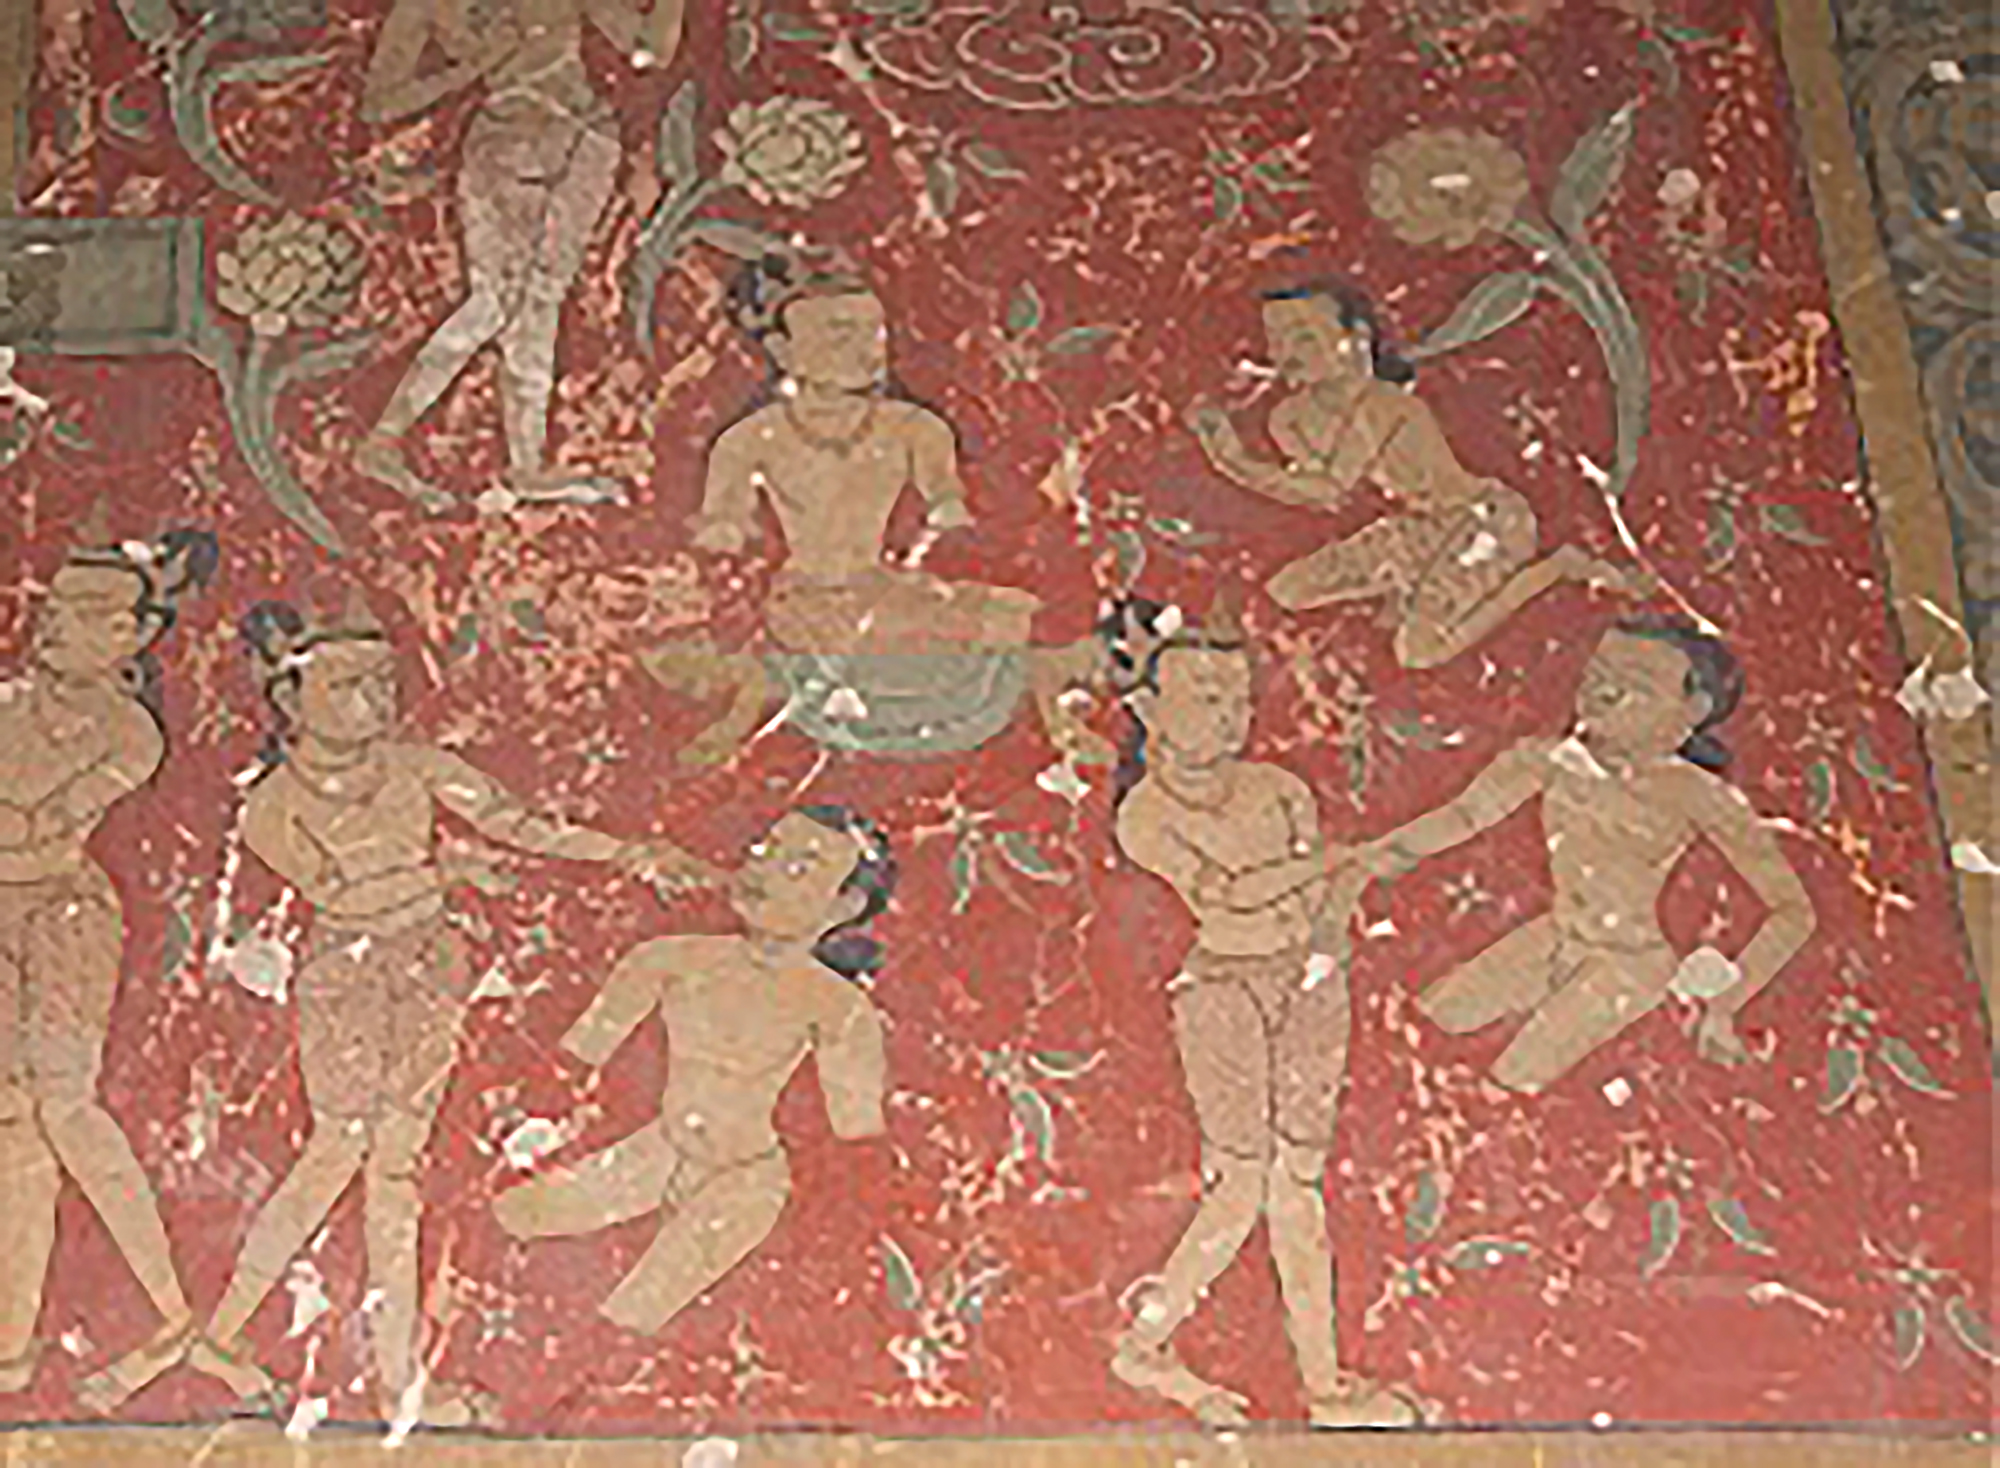 Multiple figures, some dismembered, some tending to the dismembered, against red landscape featuring floral motif